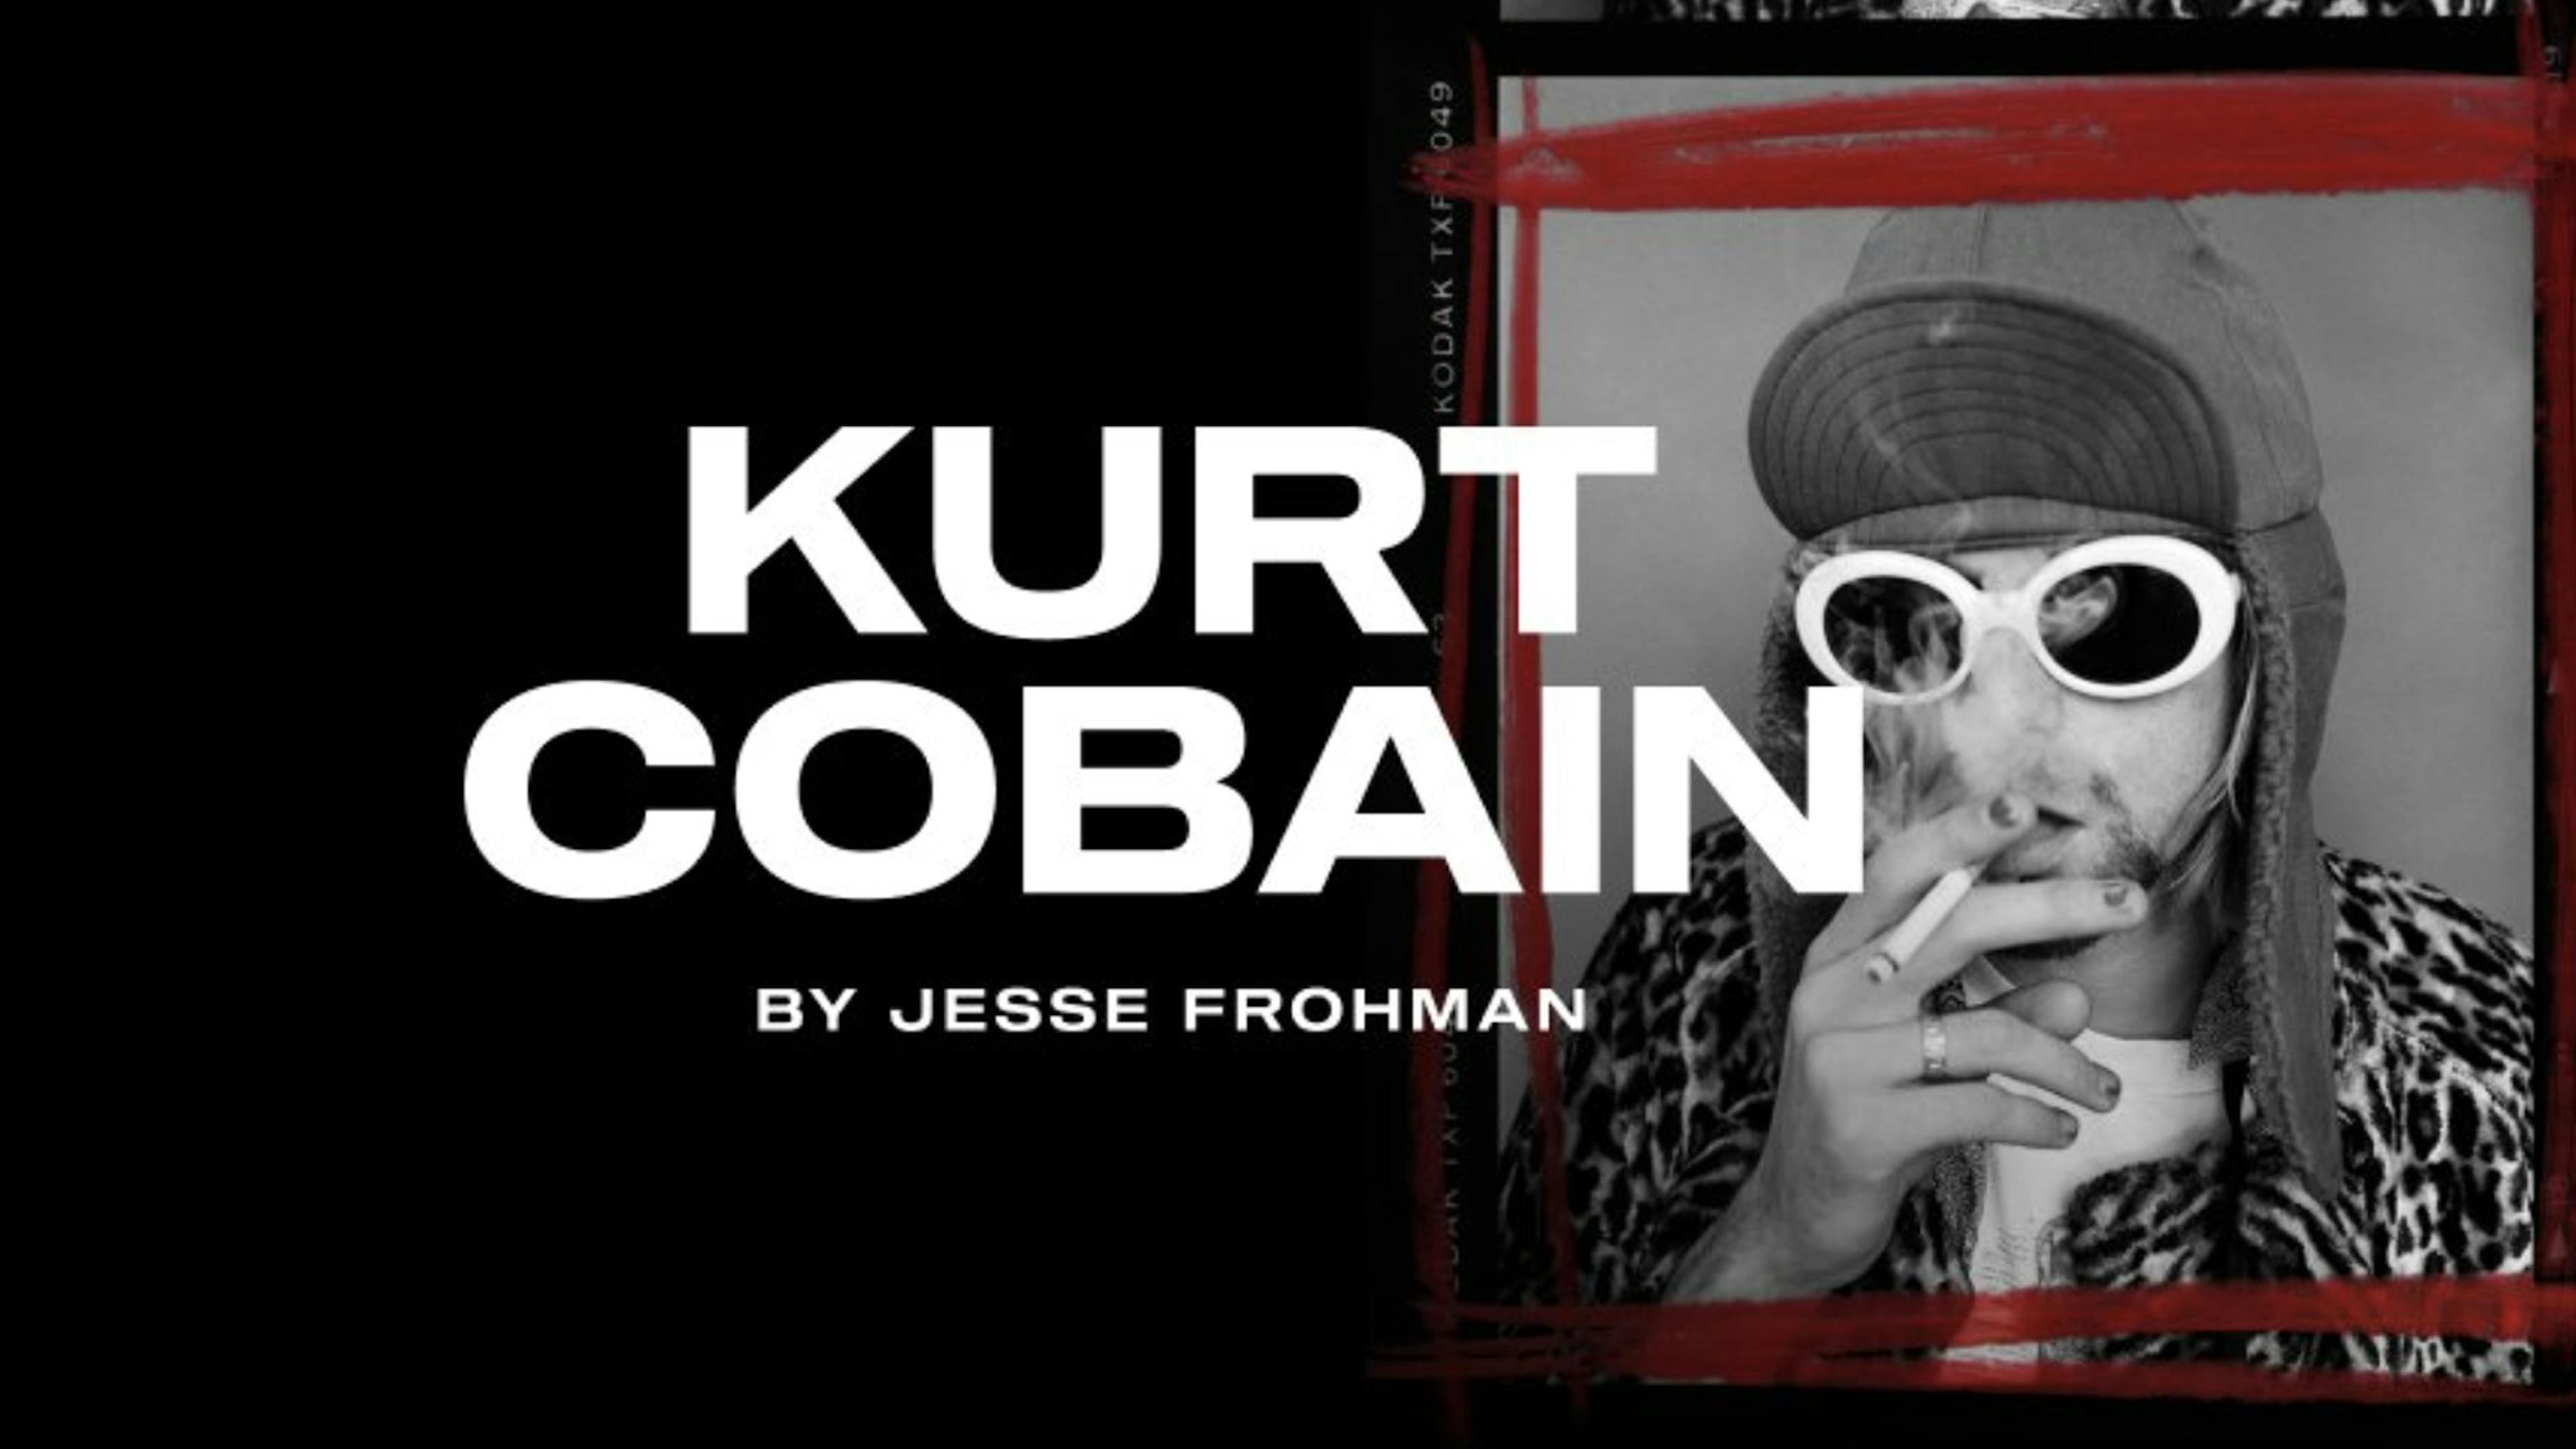 Kurt Cobain’s final photo session has been turned into an NFT